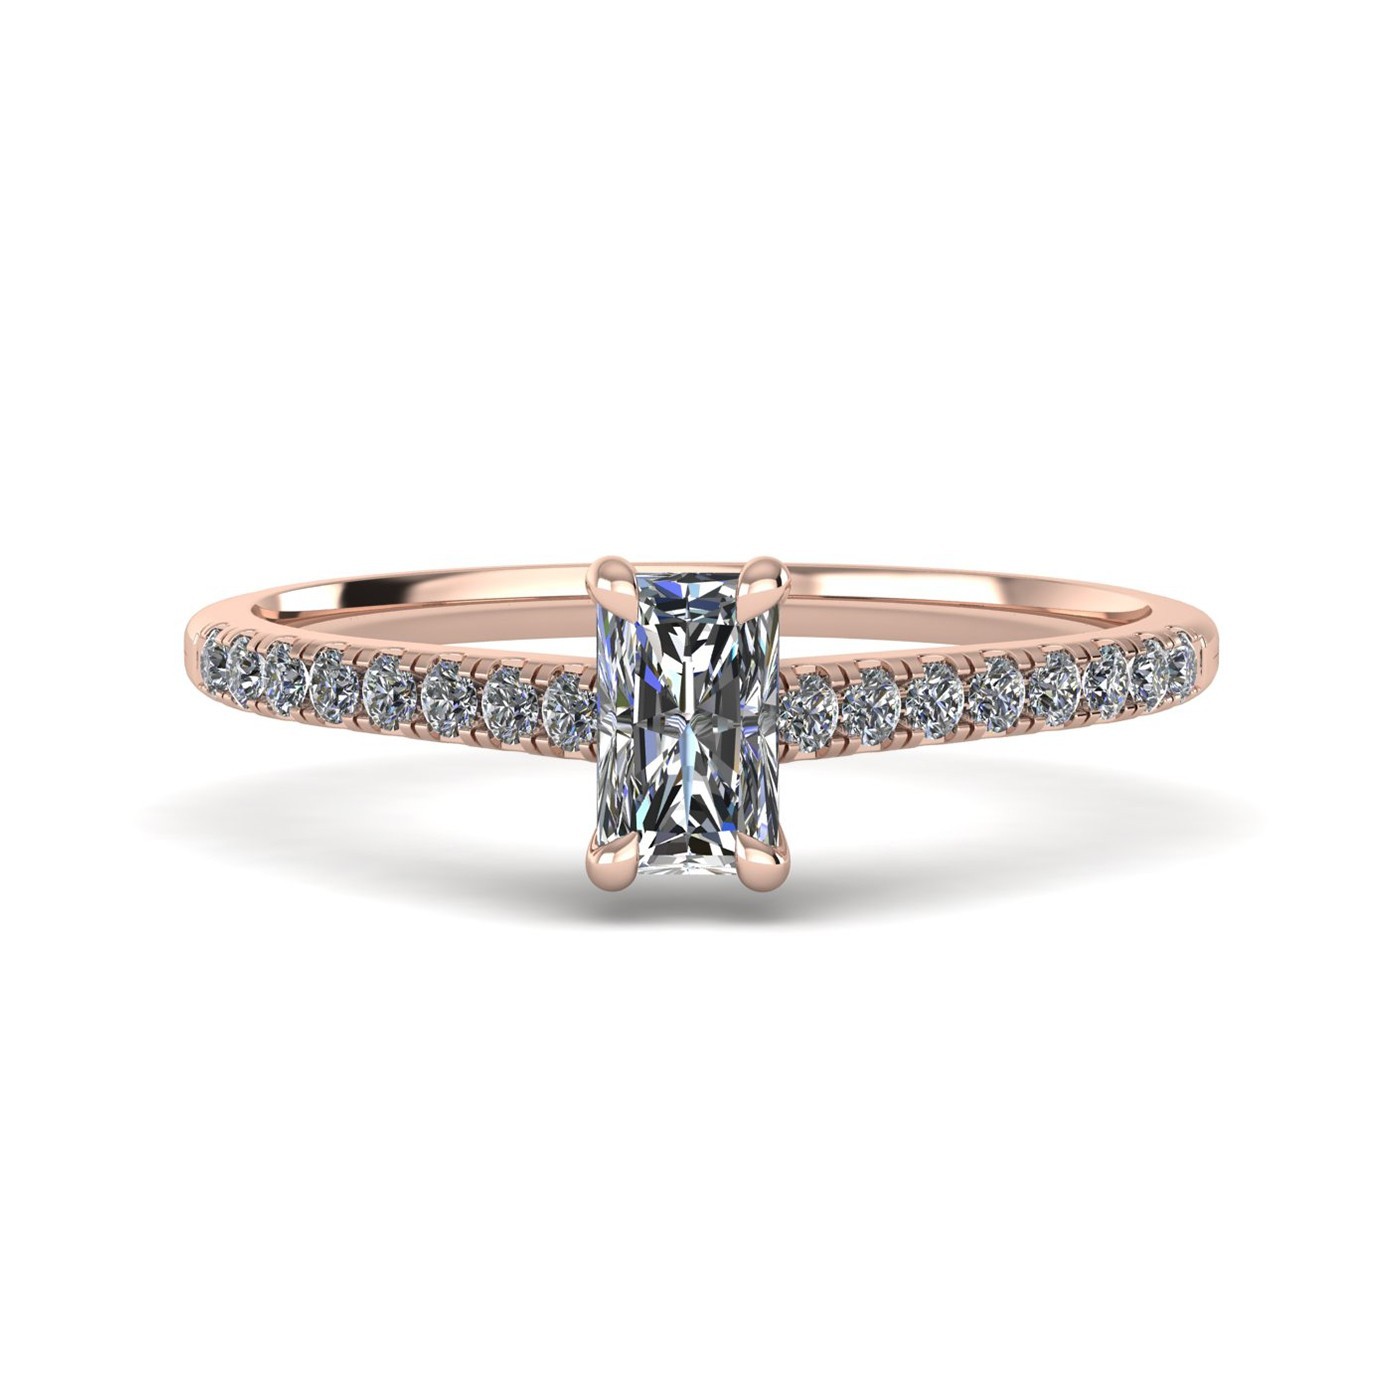 18k rose gold  1,20 ct 4 prongs radiant cut diamond engagement ring with whisper thin pavÉ set band Photos & images